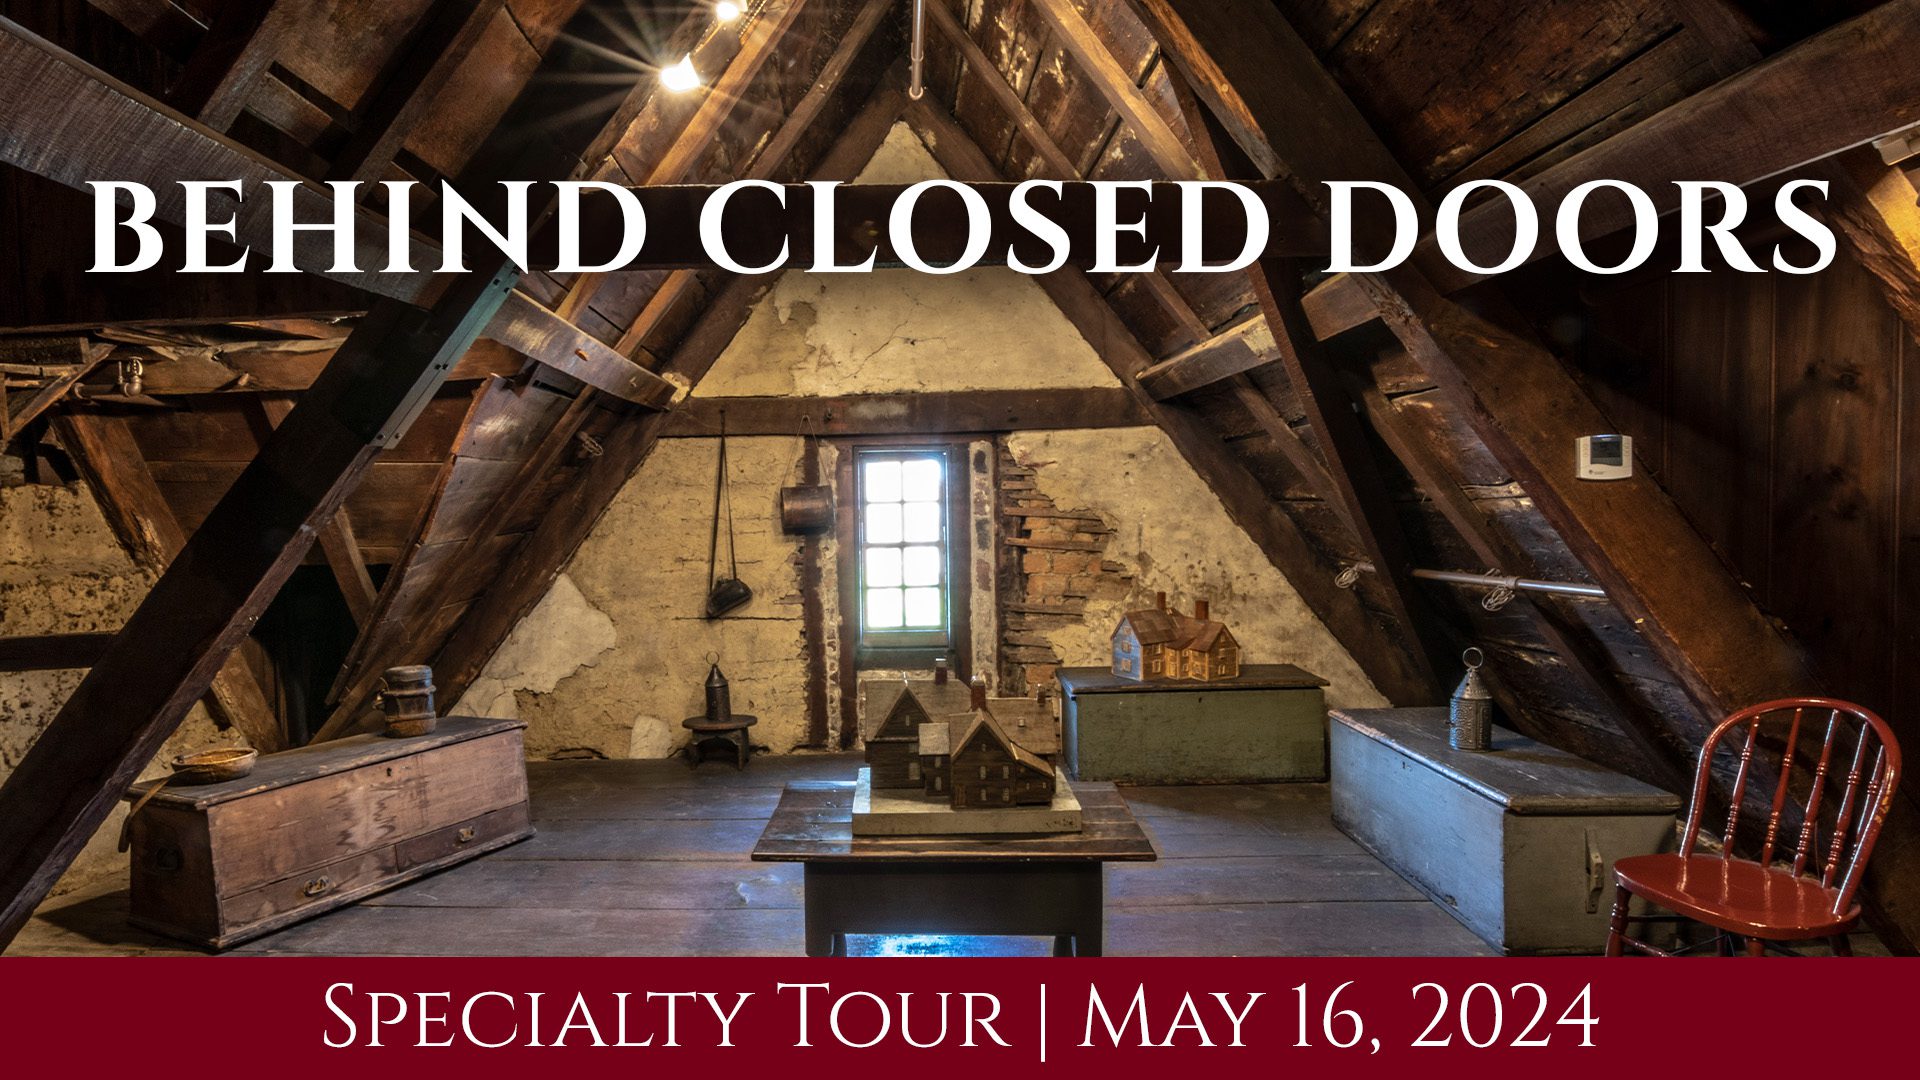 Discover secret corners: Visit a unique attic room adorned with wooden beams and filled with fascinating historical treasures. Step into history on our special 'behind closed doors' tour on May 16, 2024. Join us as we unveil the delightful unseen spaces of history.